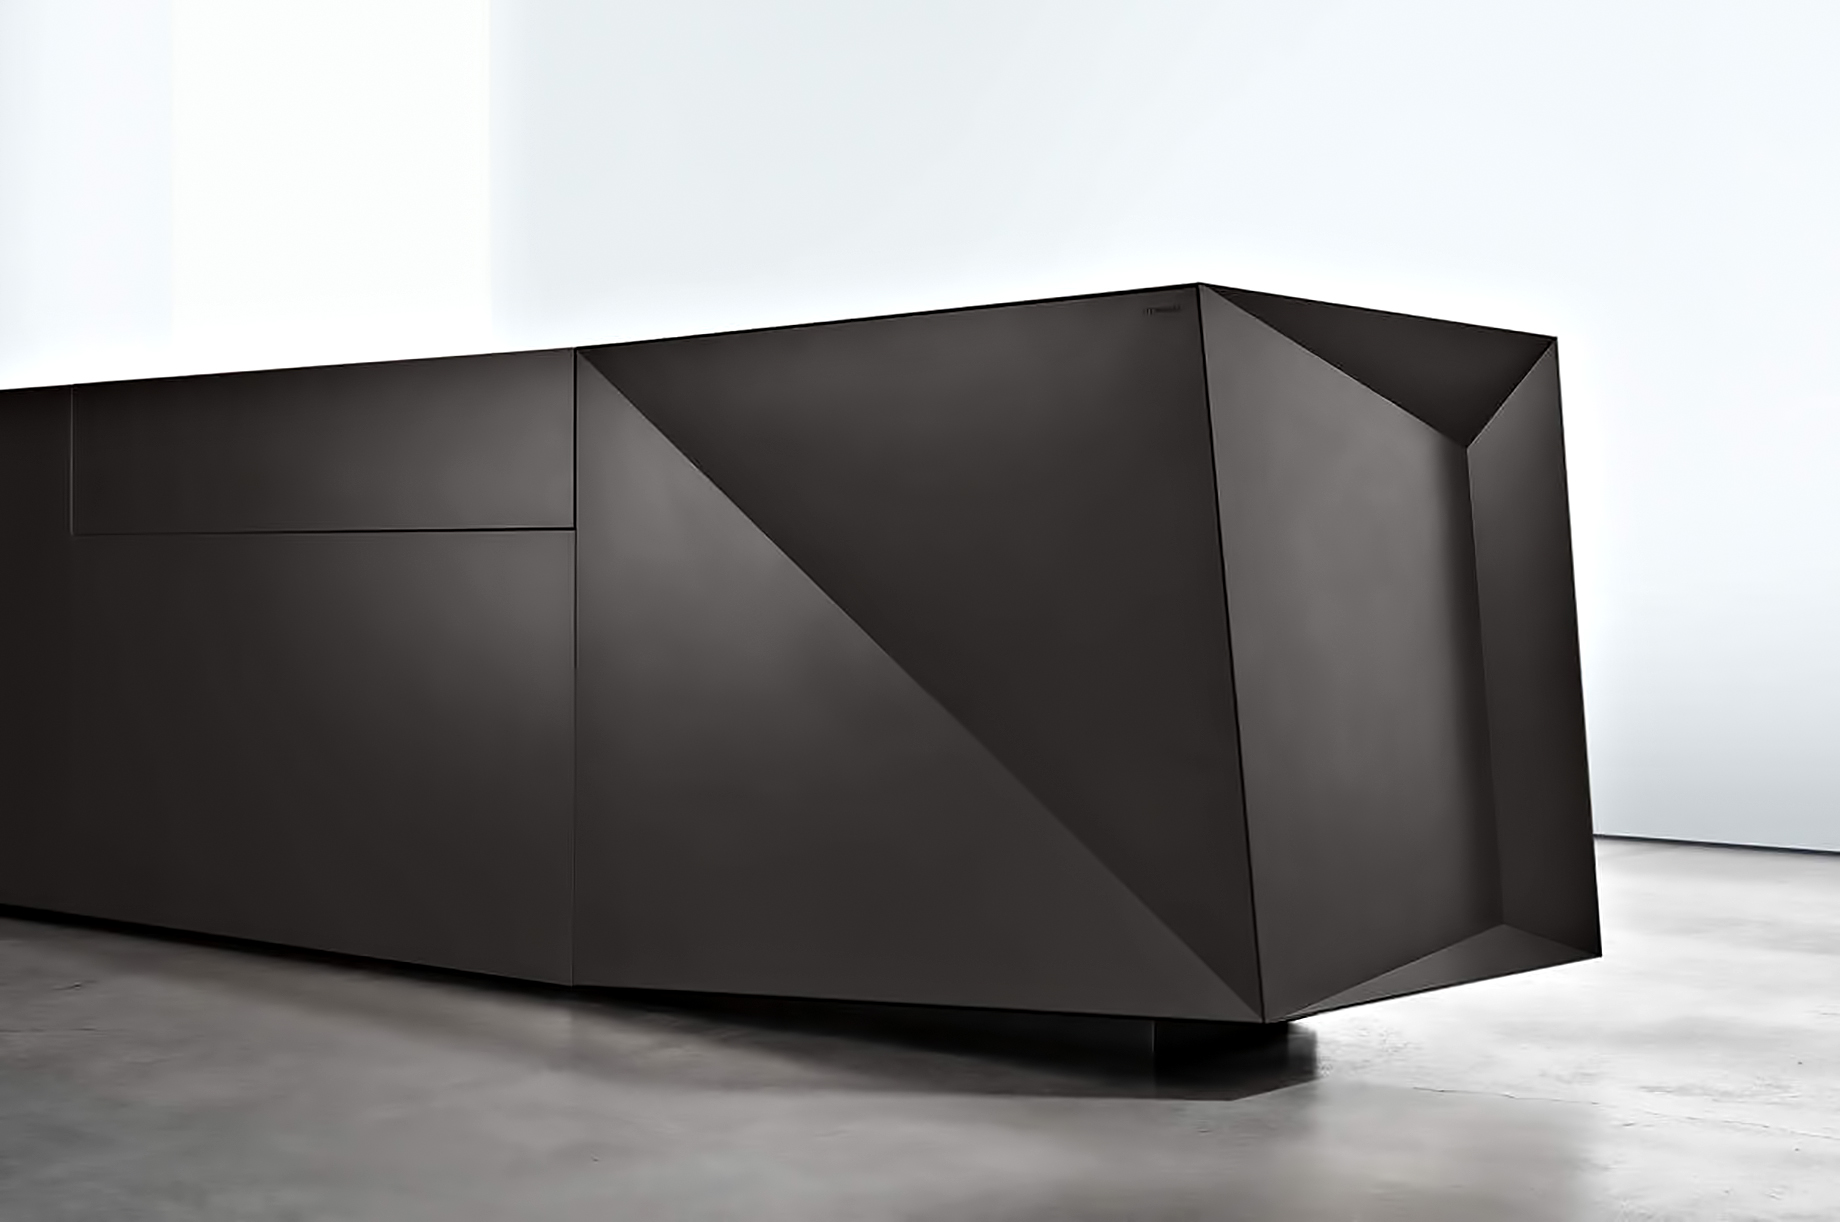 Iconic Steininger FOLD High Tech Kitchen Block Design Inspired by Origami – Formidable Black